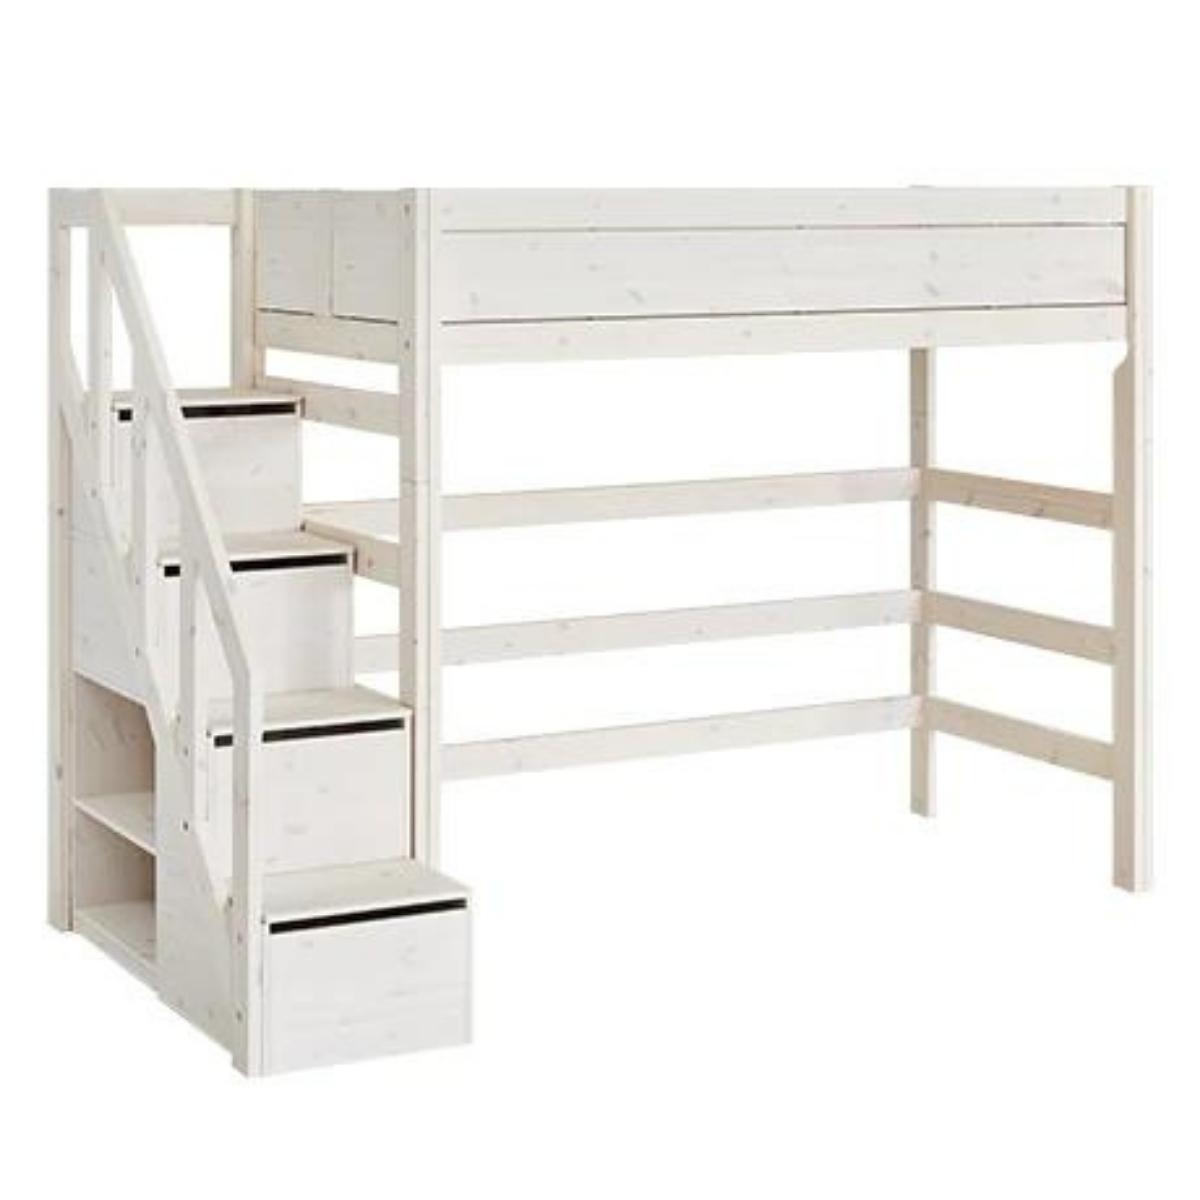 FREE Installation - LIFETIME Kidsrooms High Sleeper with Steps - Little Snoozes